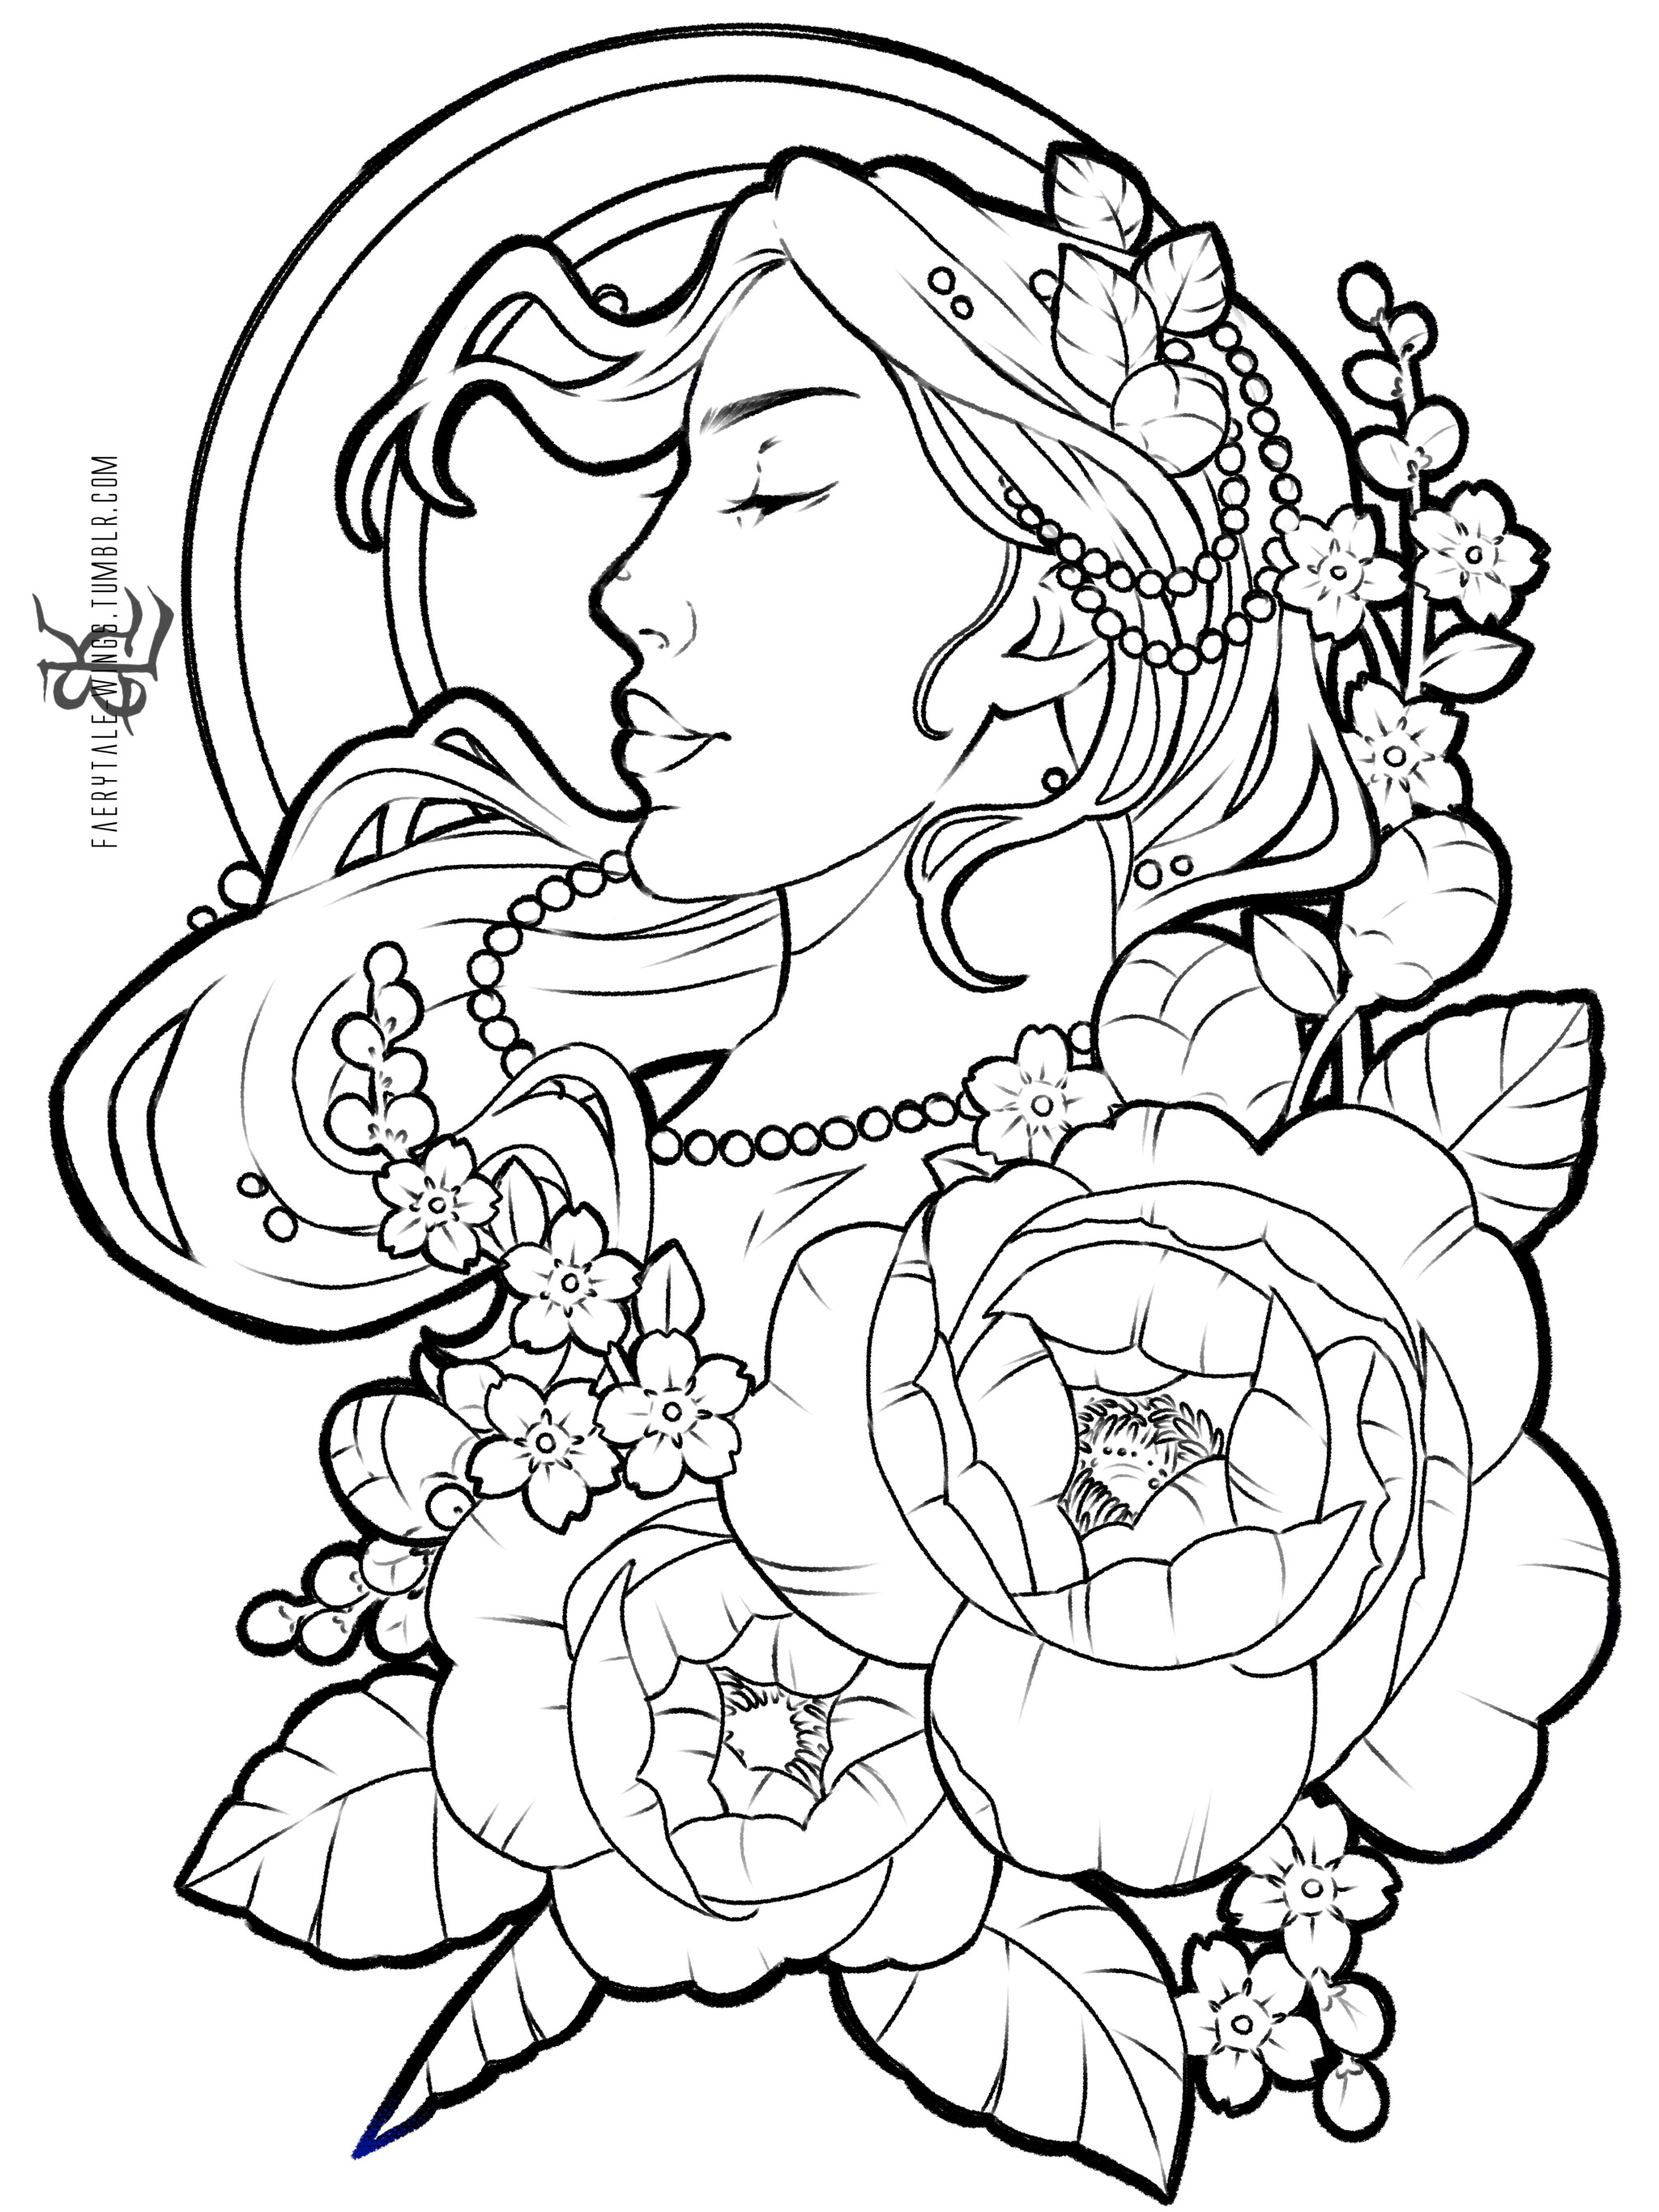 #coloring-book on Tumblr